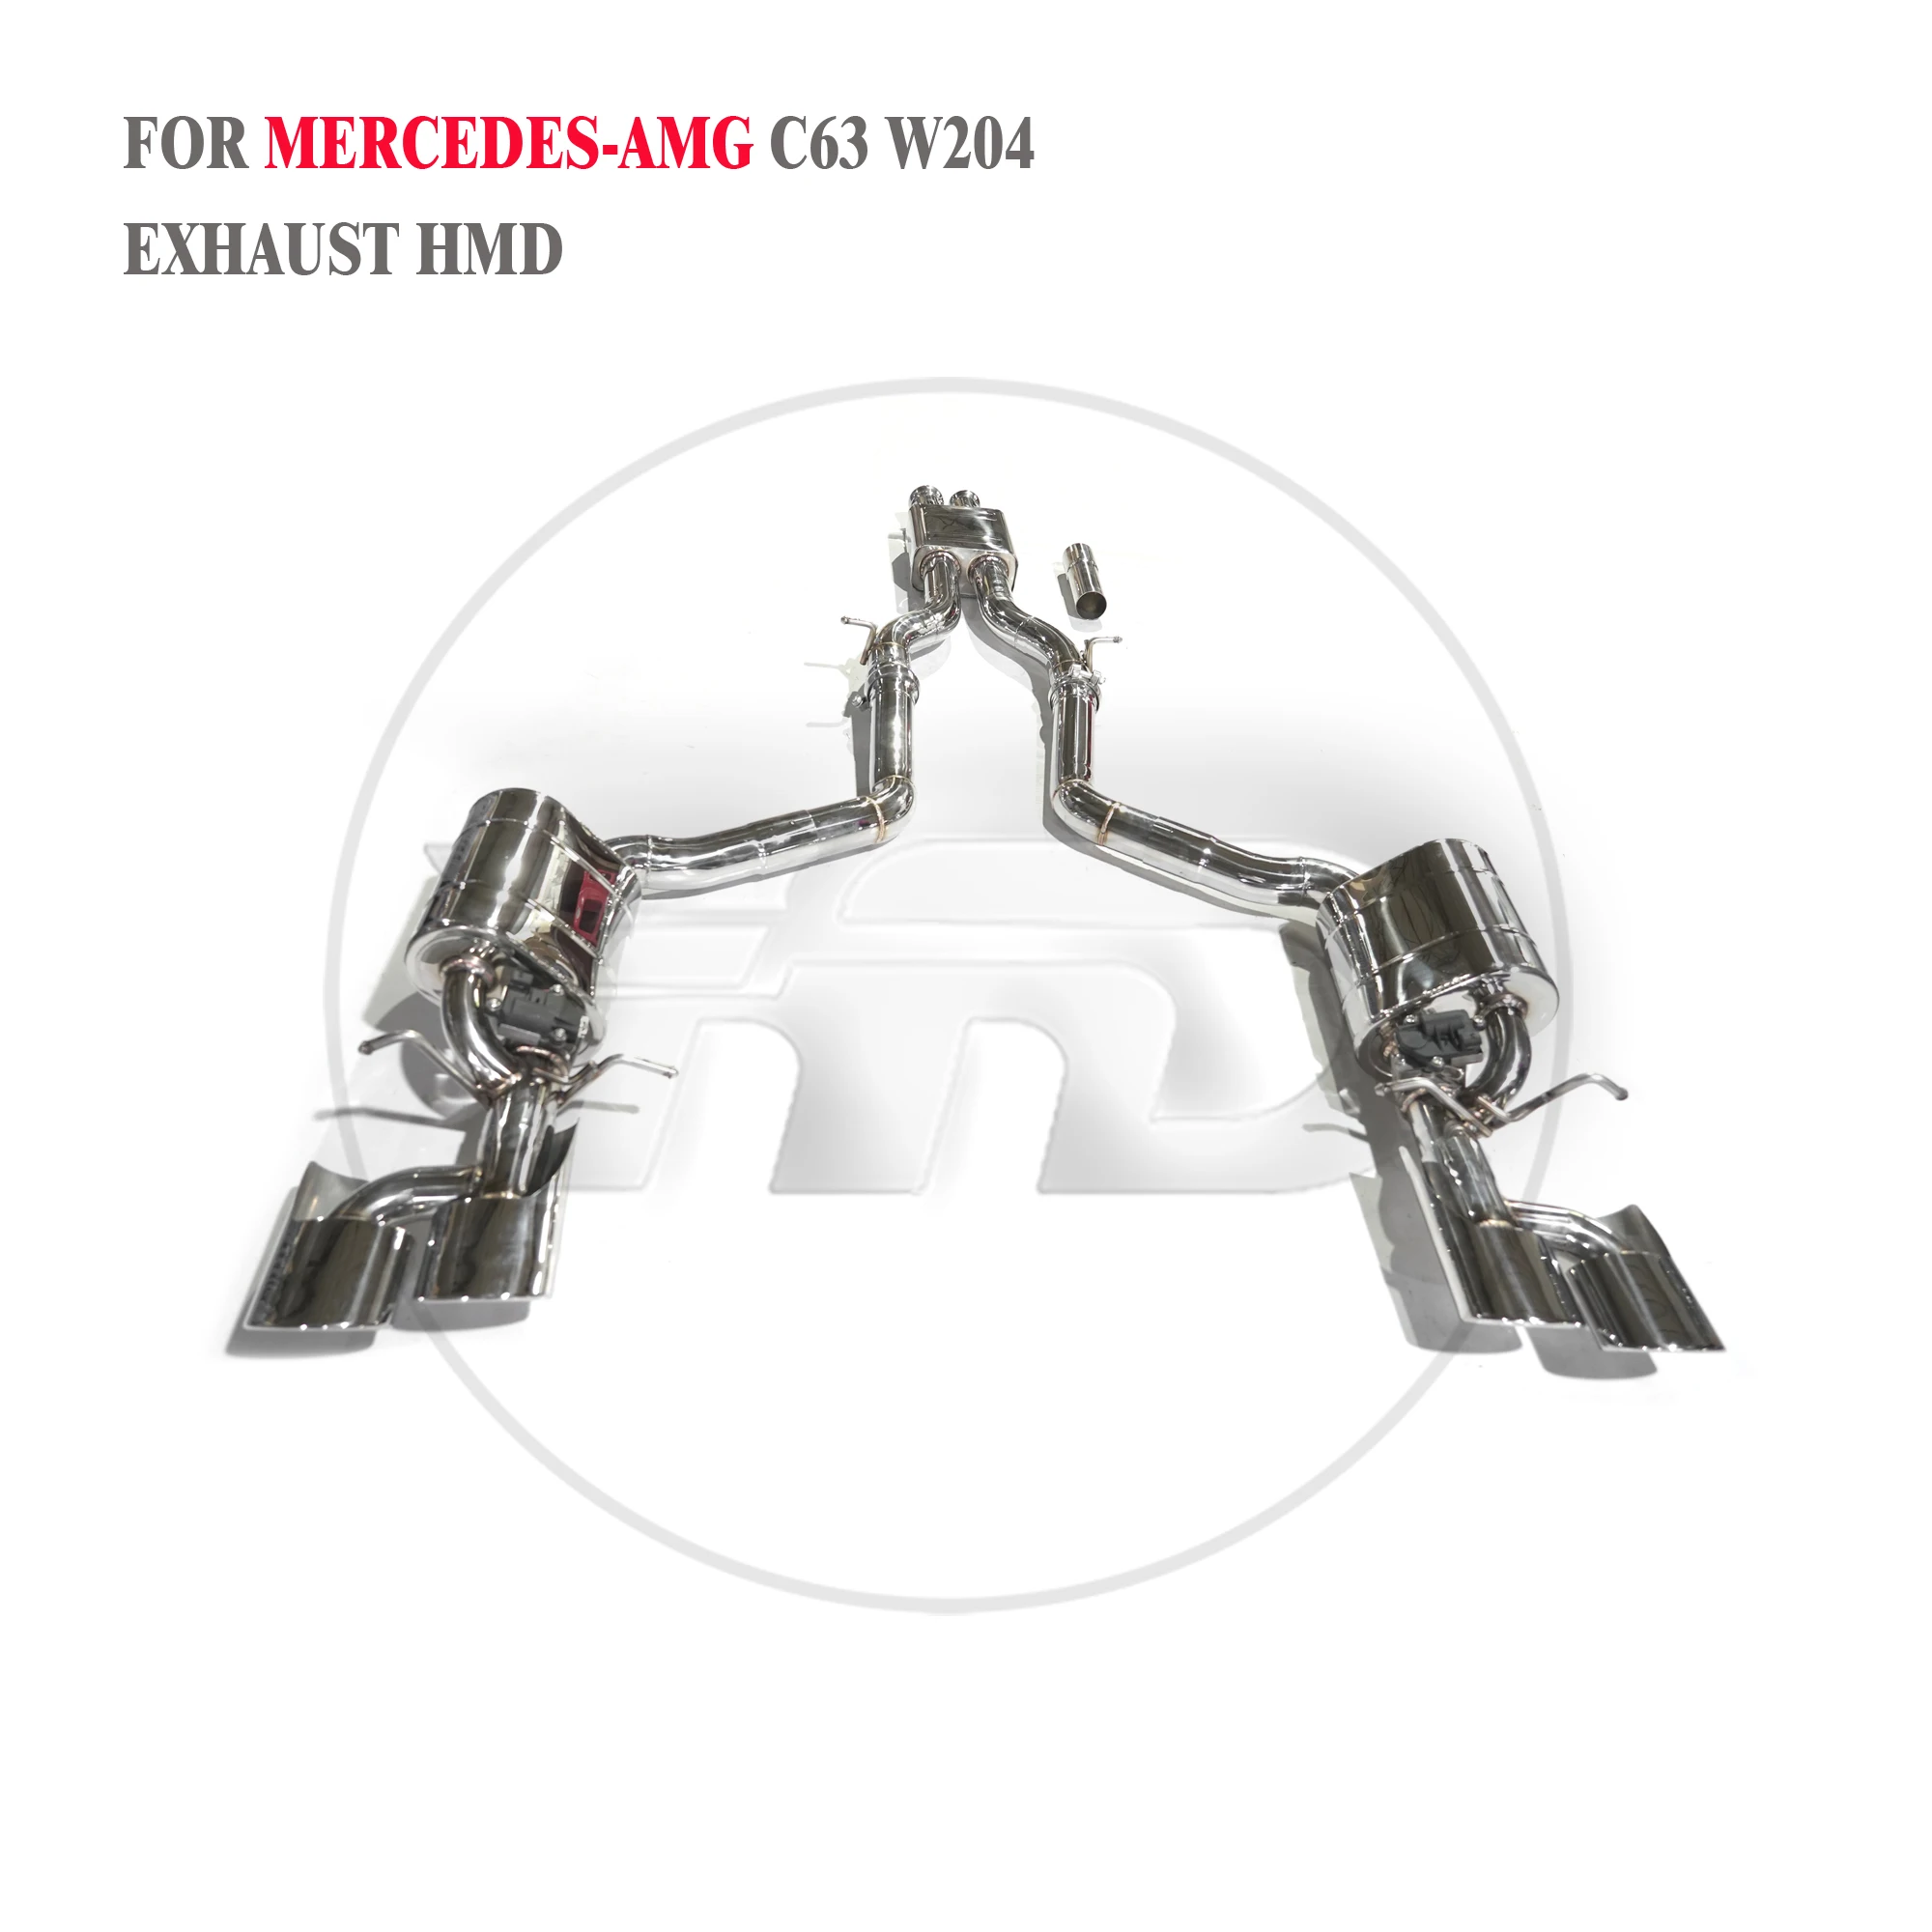 

HMD Stainless Steel Exhaust System Performance Catback for Mercedes Benz AMG W204 C63 6.2L 2007-2013 Muffler With Valve